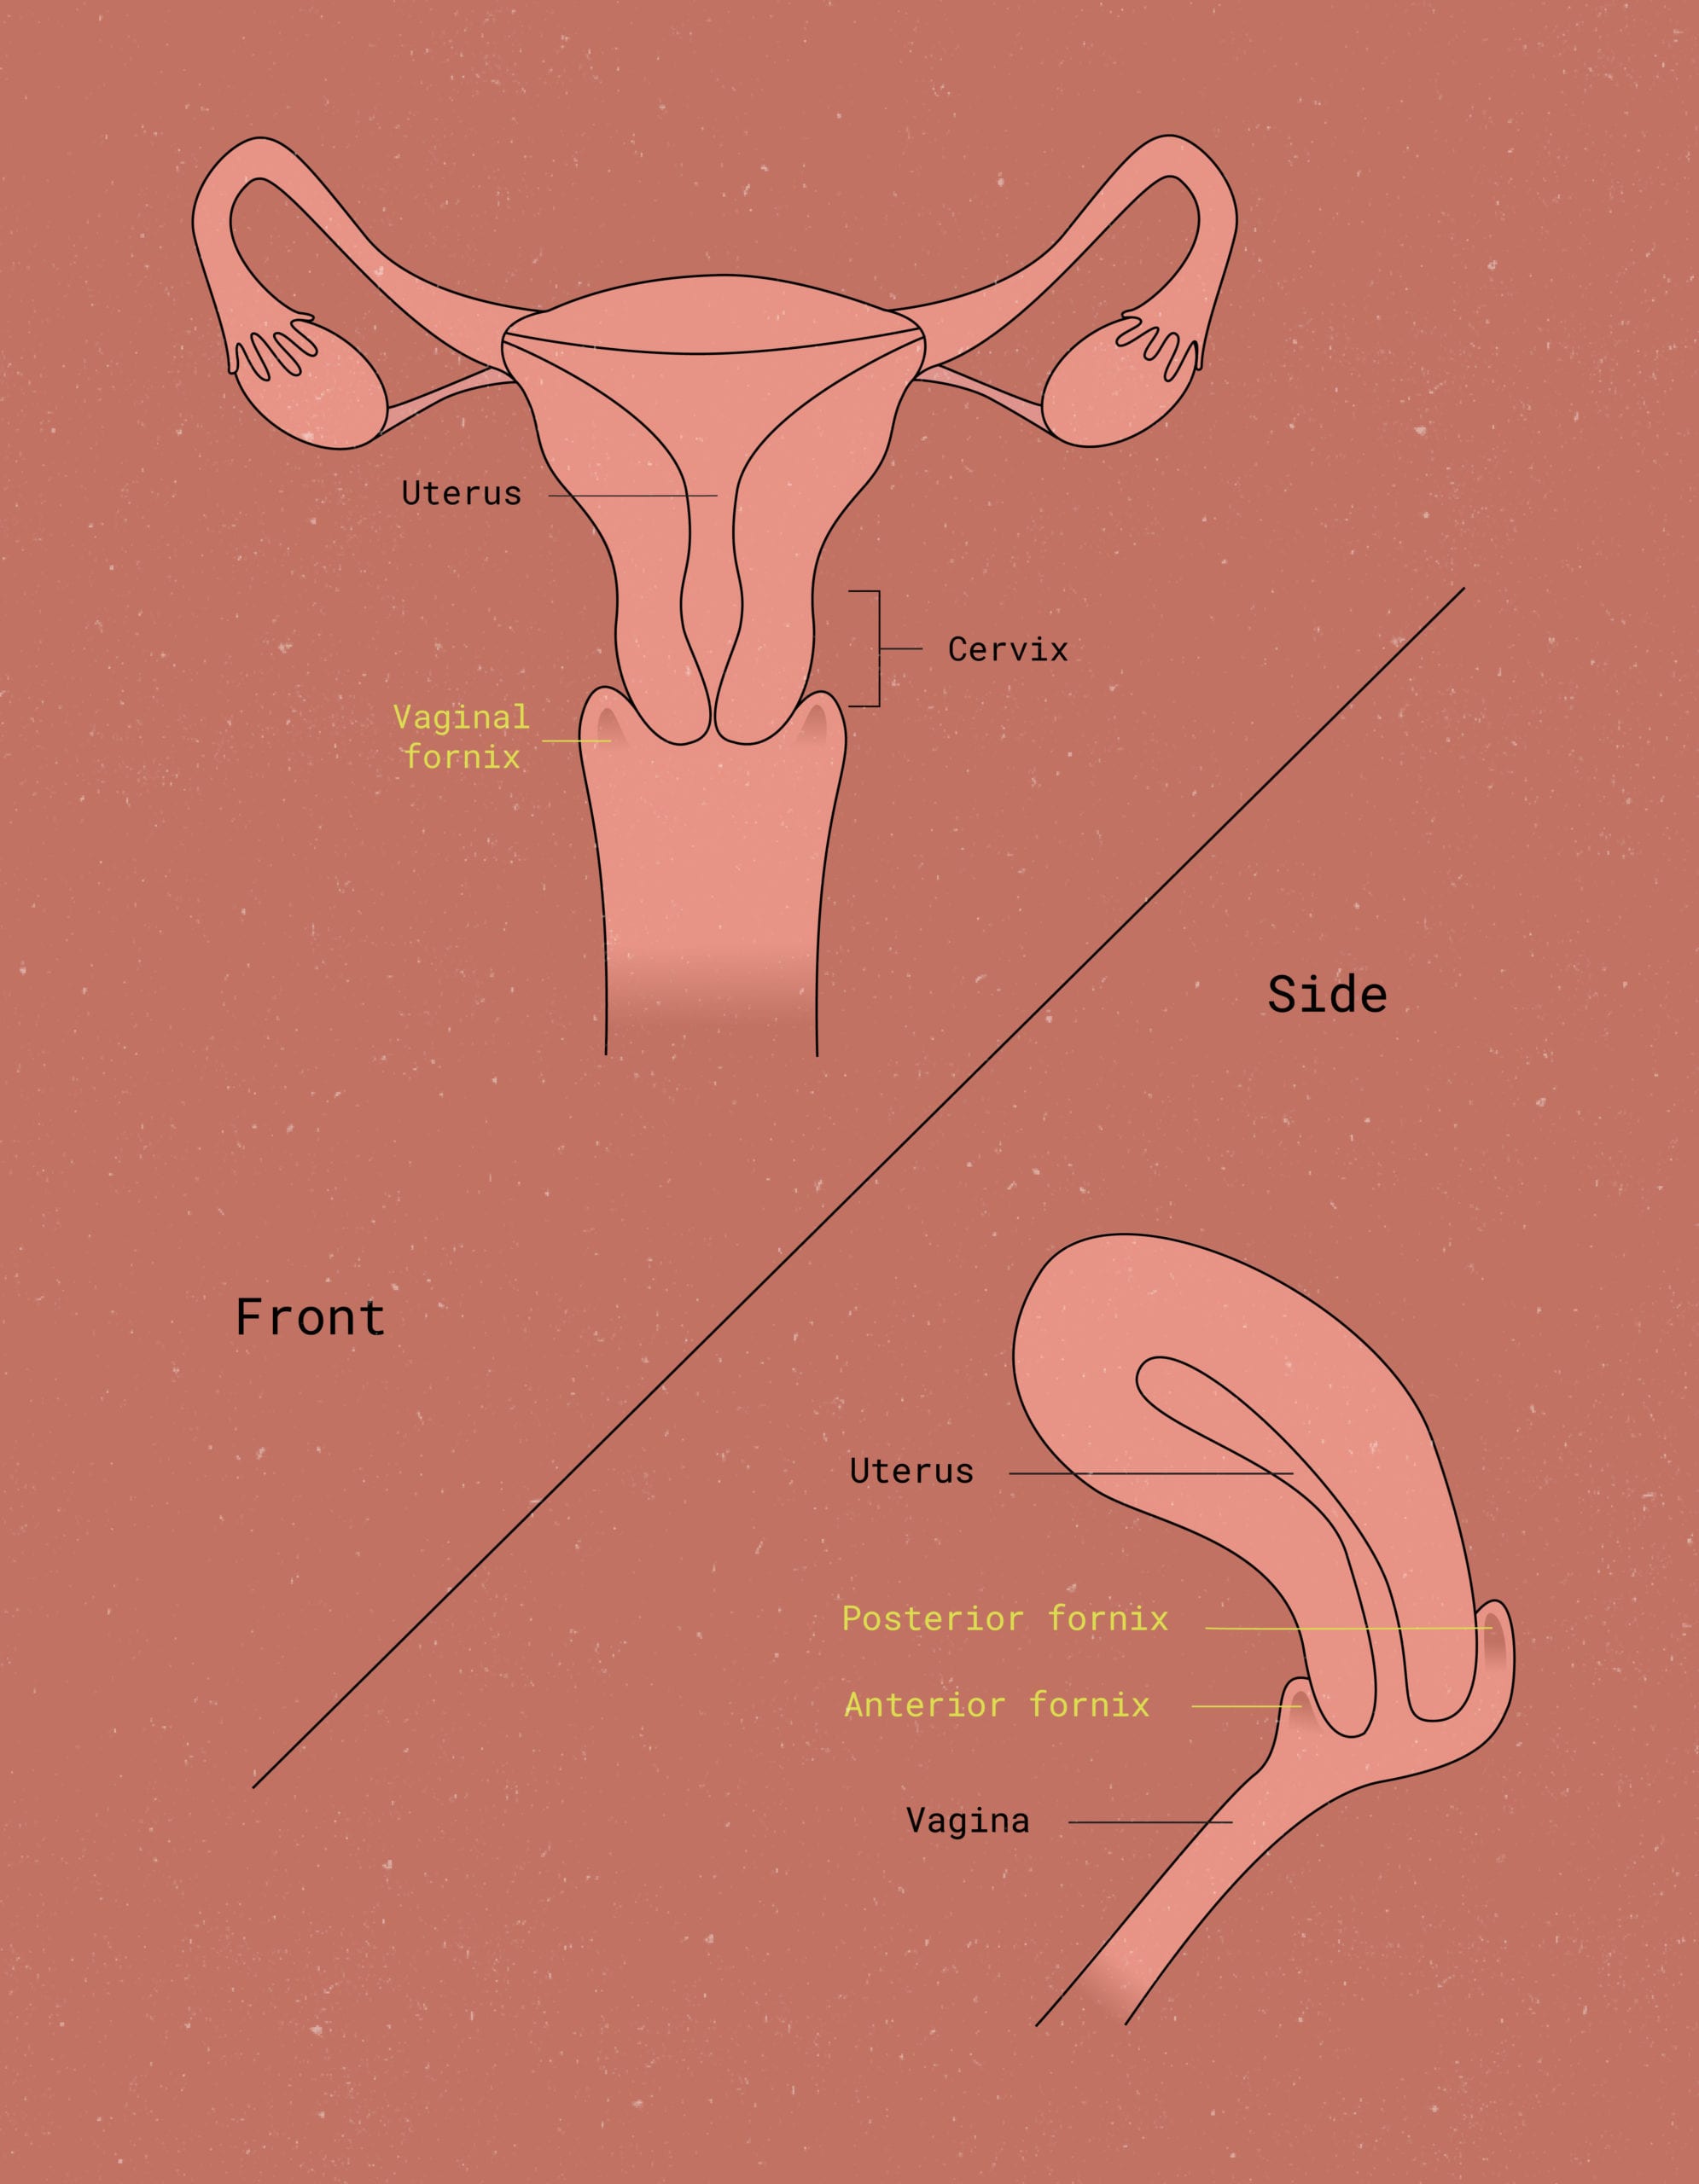 What is the vaginal<br> fornix?